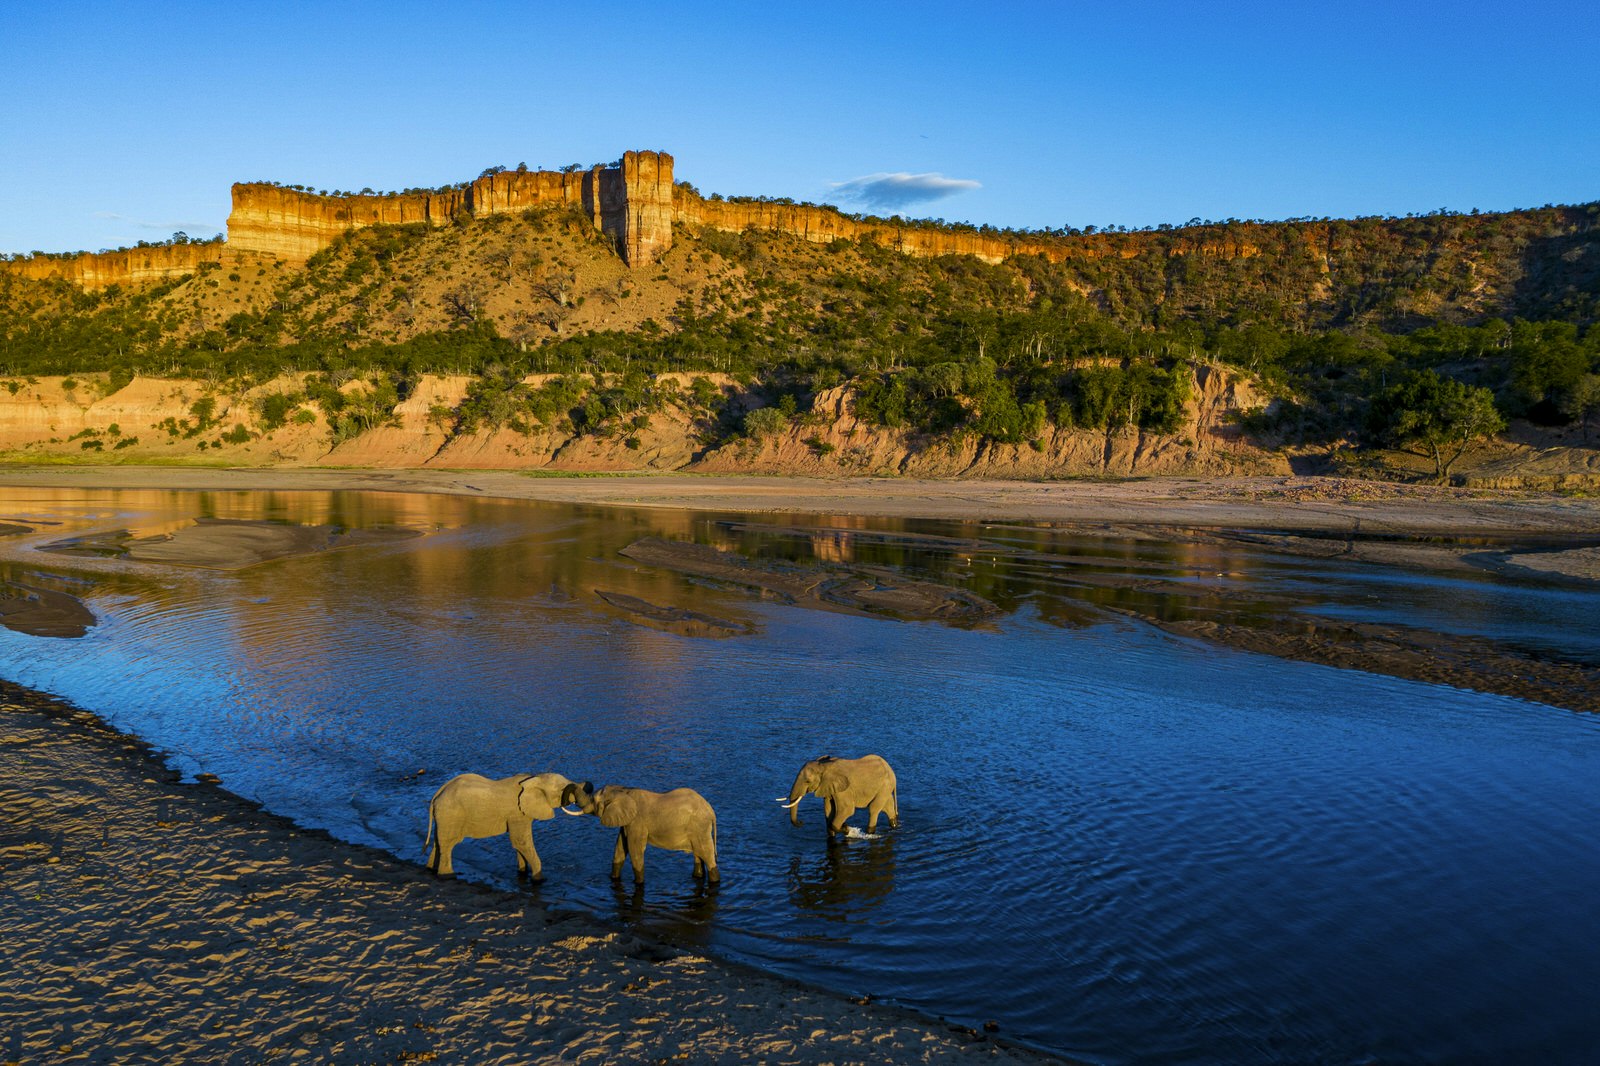 Three elephants cavort in the shallows of the Runde River, with the Chilojo Cliffs in the background.